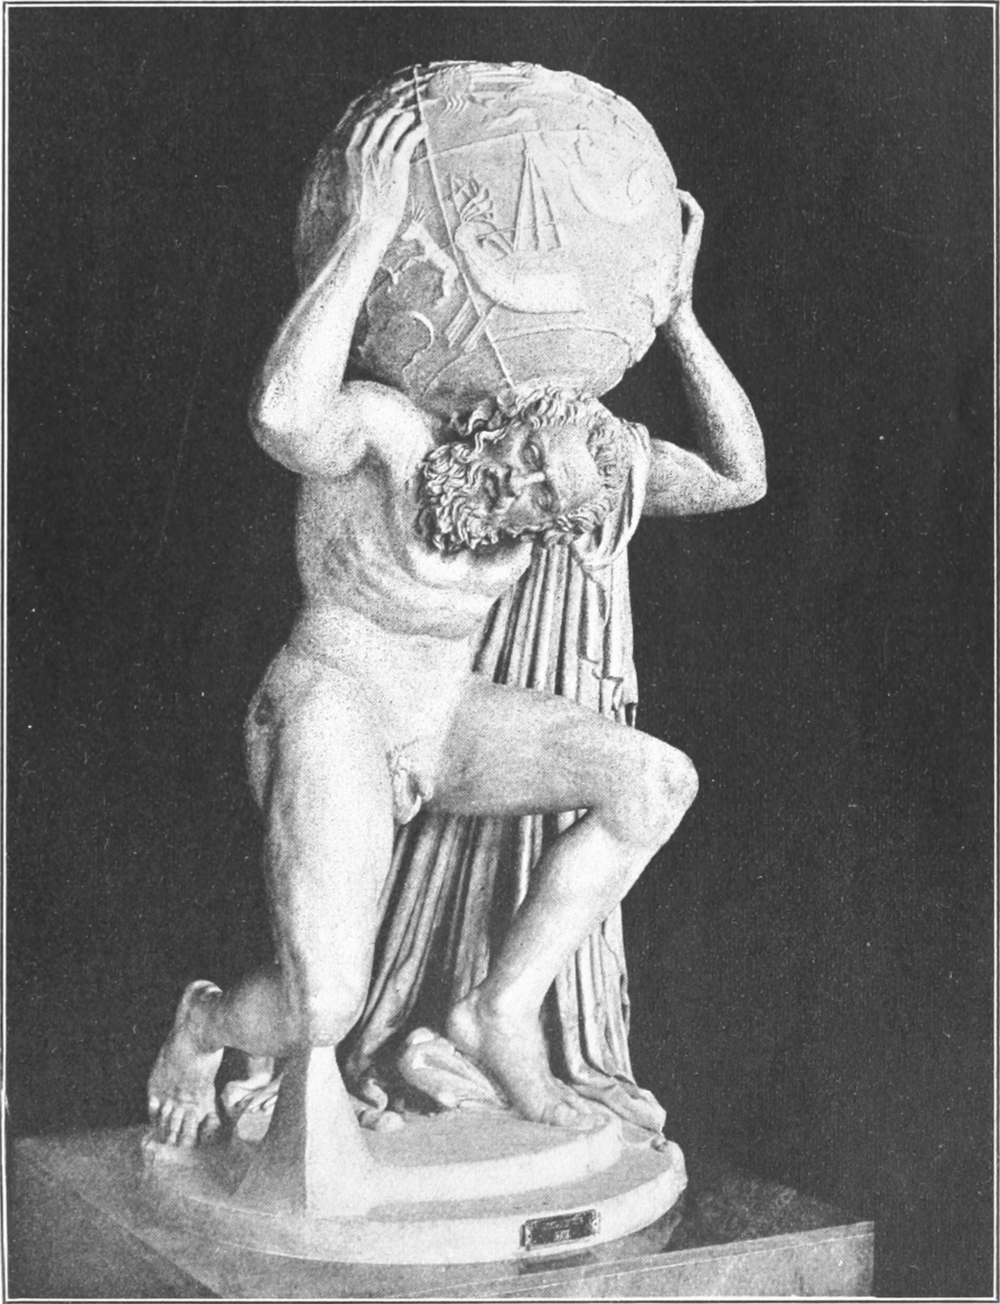 A photograph of a marble sculpture of Atlas